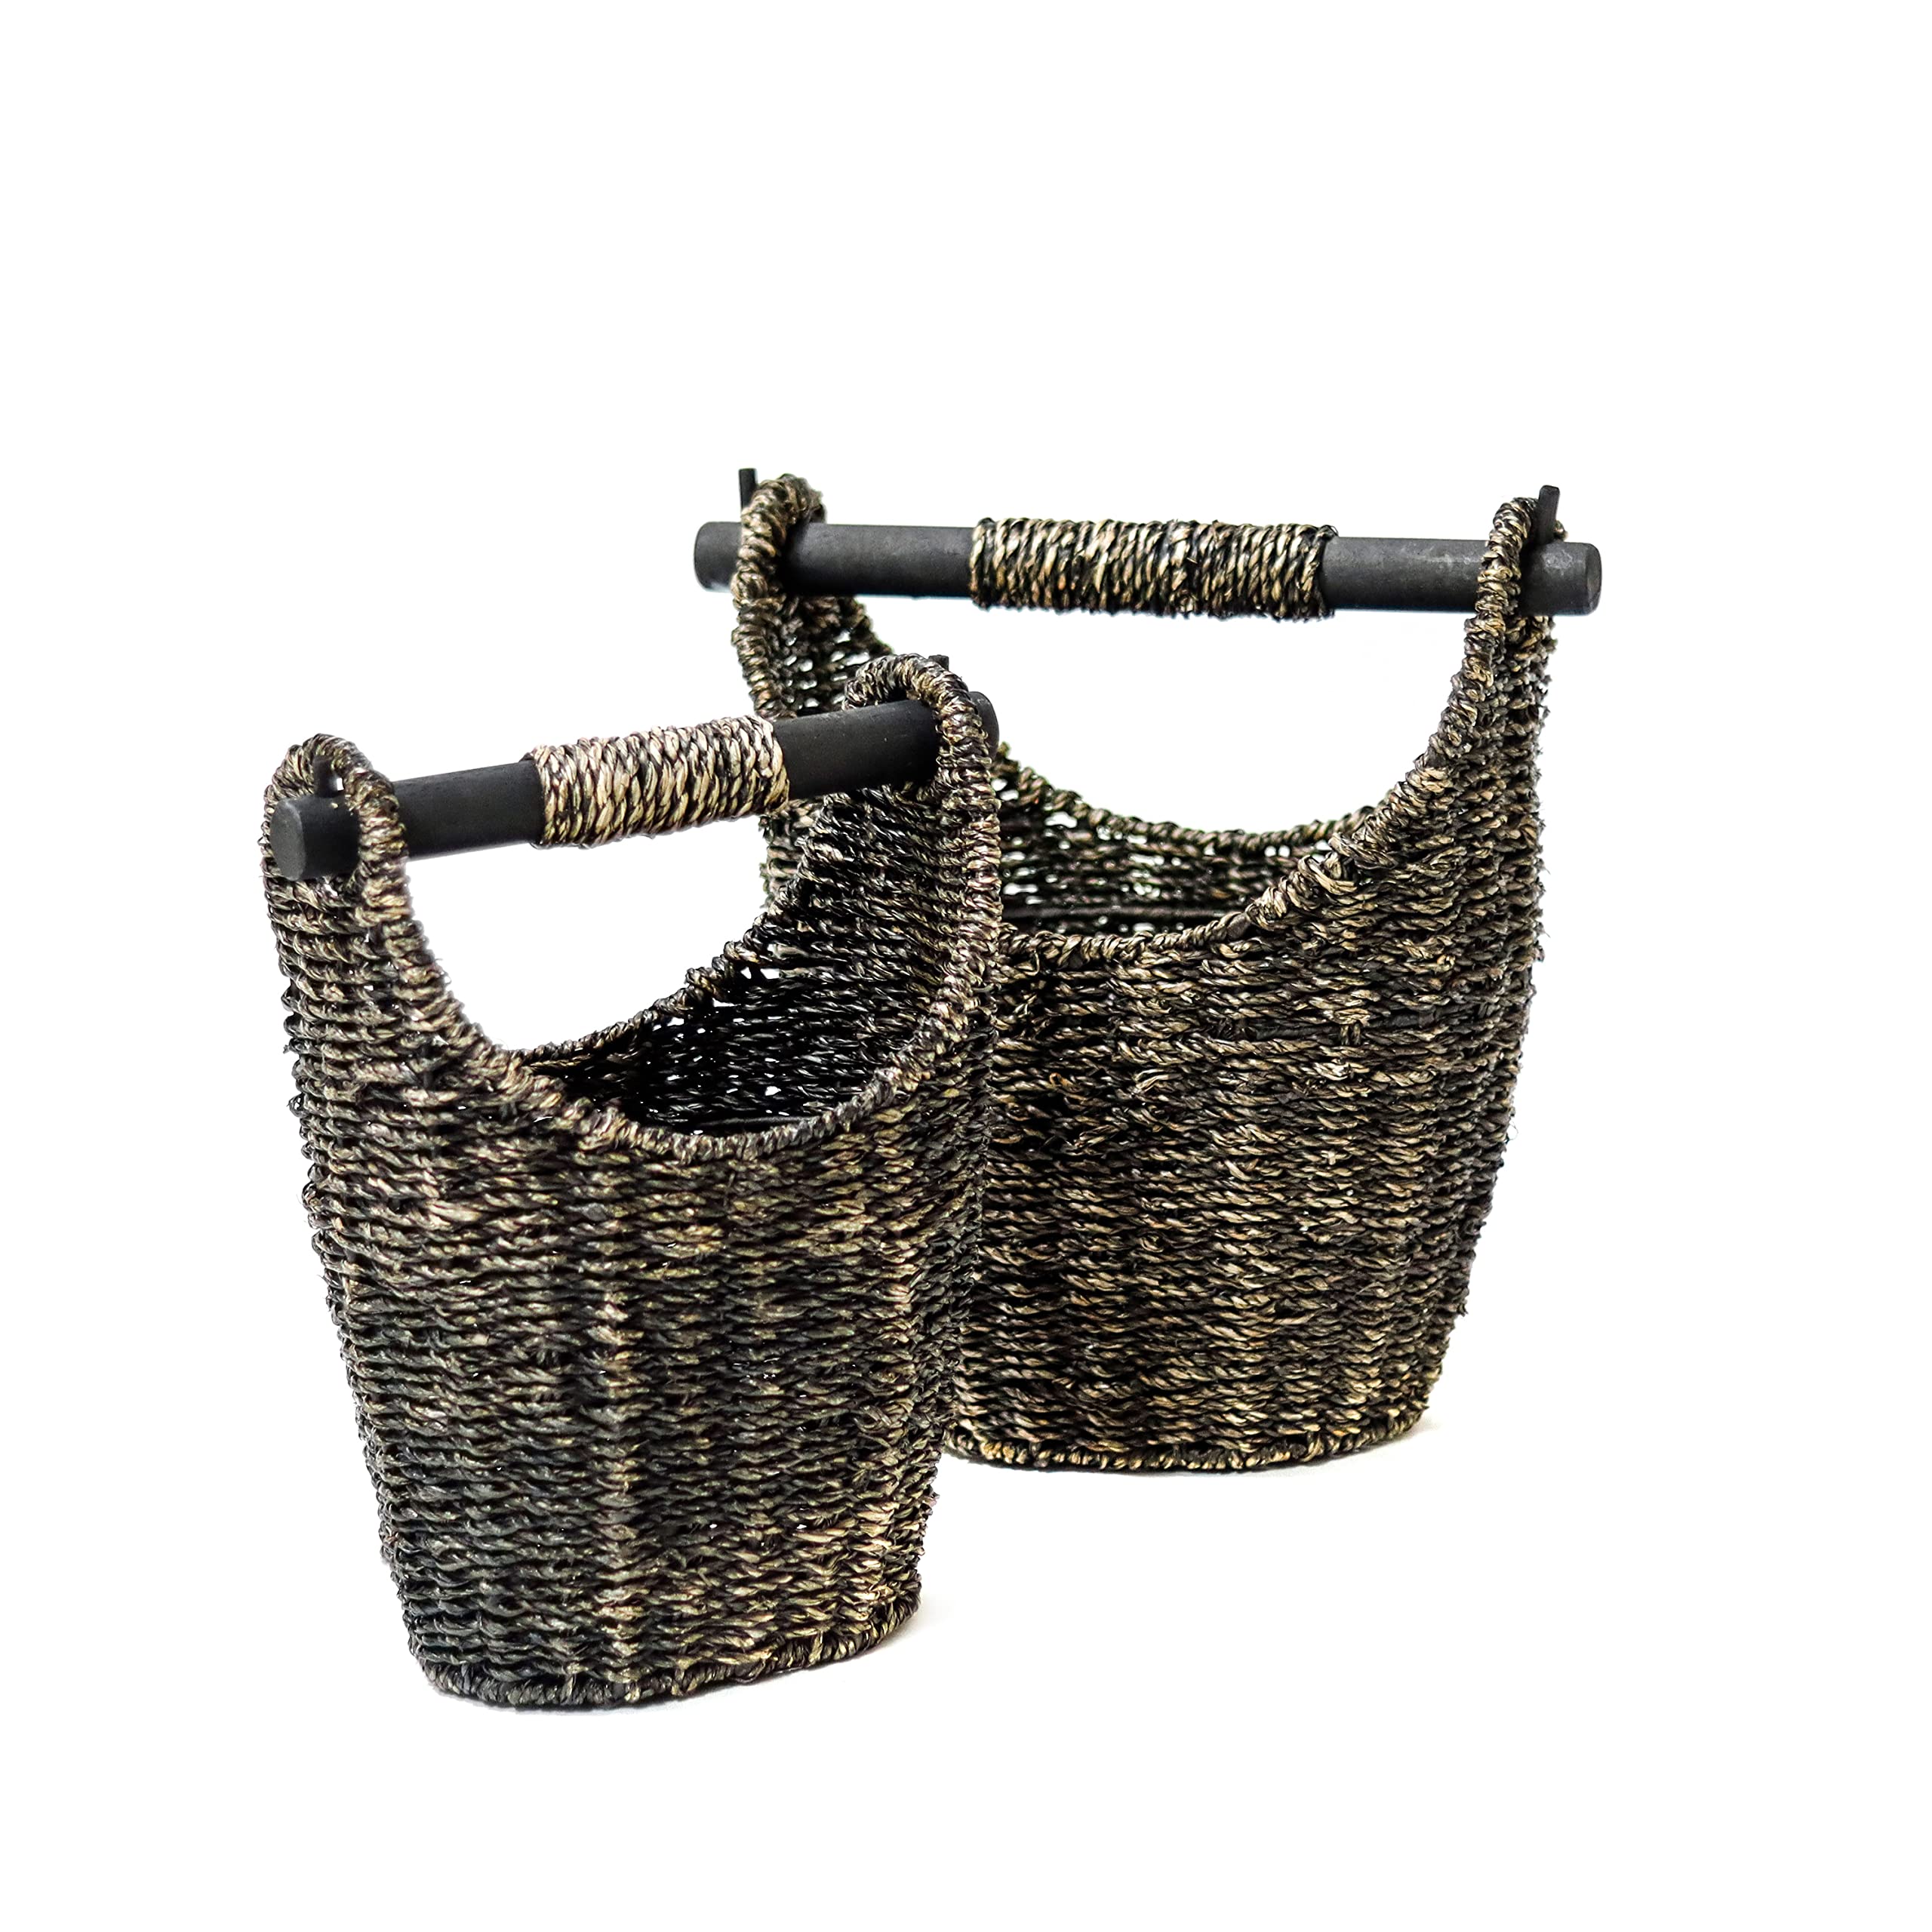 Trademark Innovations 12.2" & 9.4" Seagrass Baskets with Wooden Handles - Set of 2 (Brown)